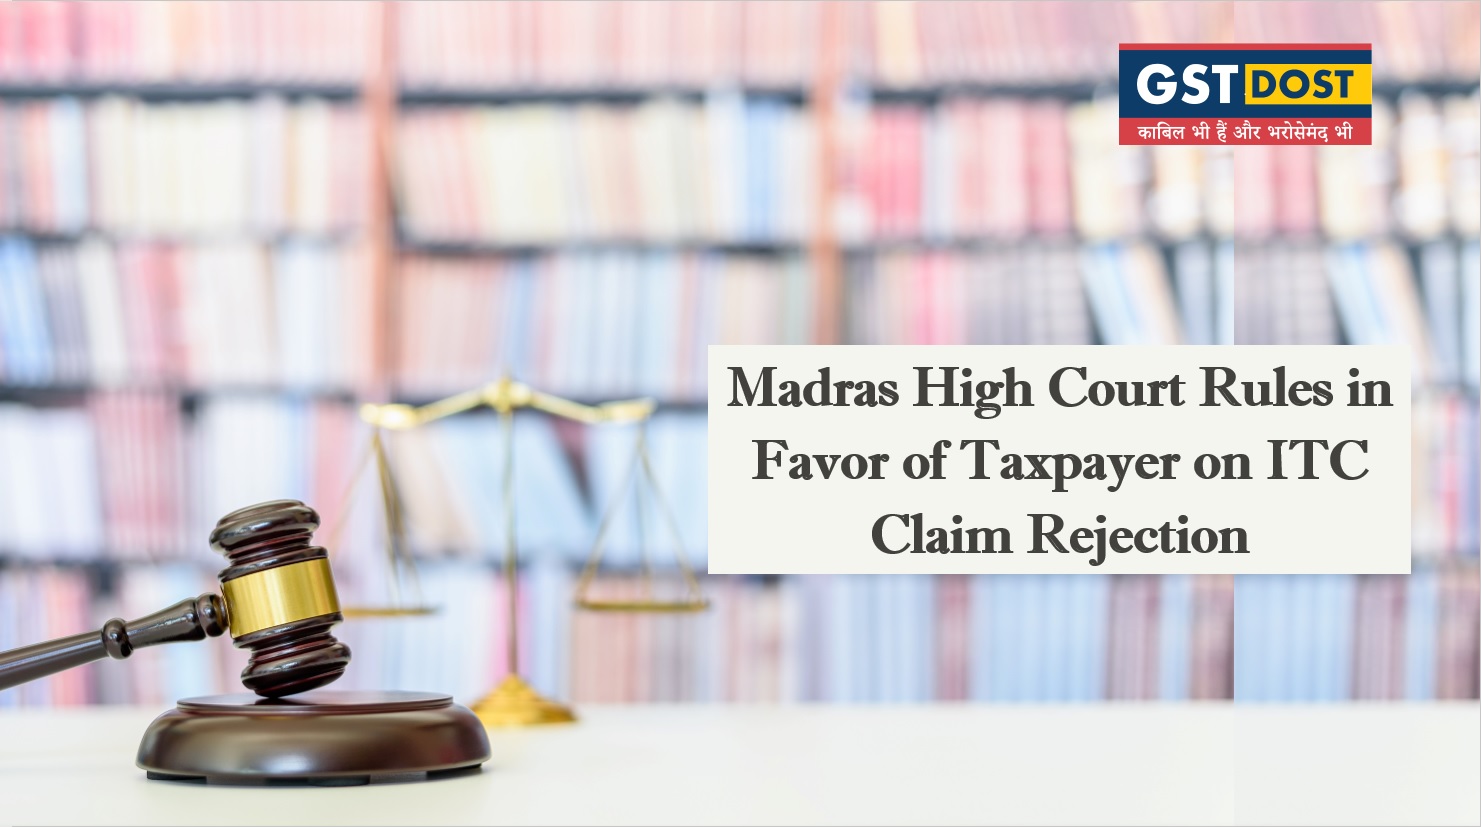 Madras High Court Quashes ITC Claim Rejection Based Solely on GSTR-3B and Directs Authorities to Consider Other Returns like GSTR 2A and GSTR 9.